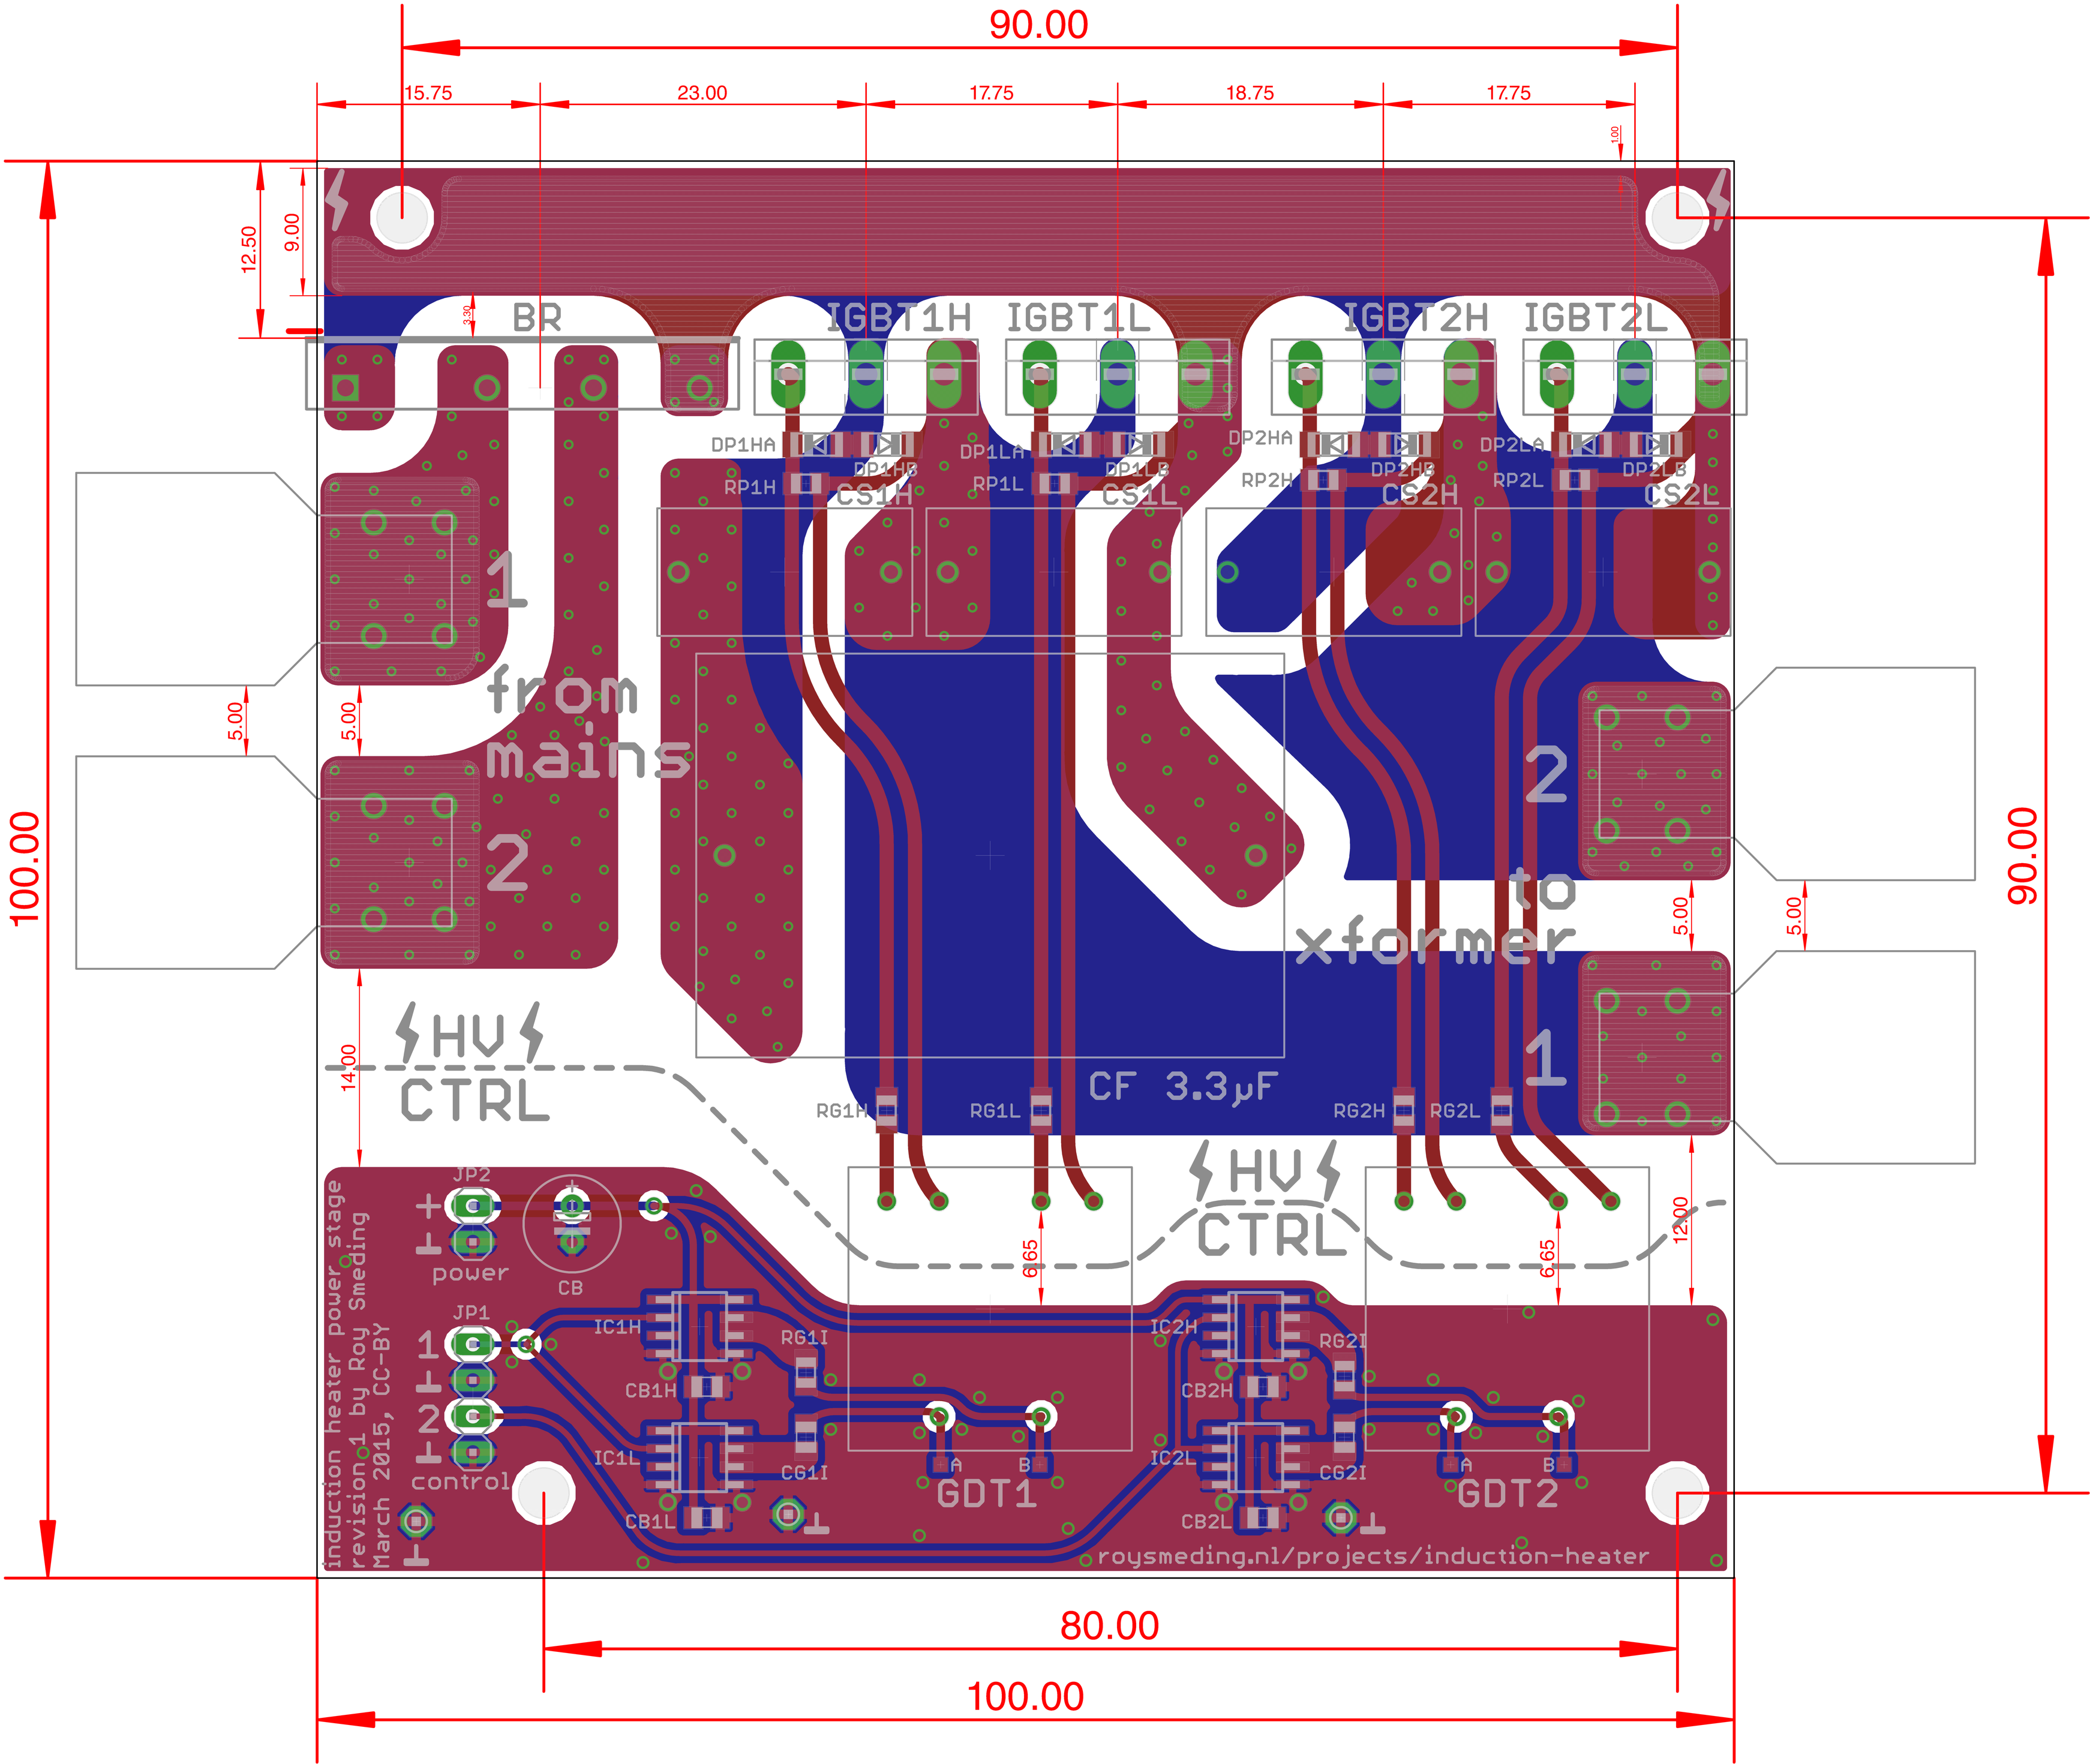 Induction heater power stage board layout.png